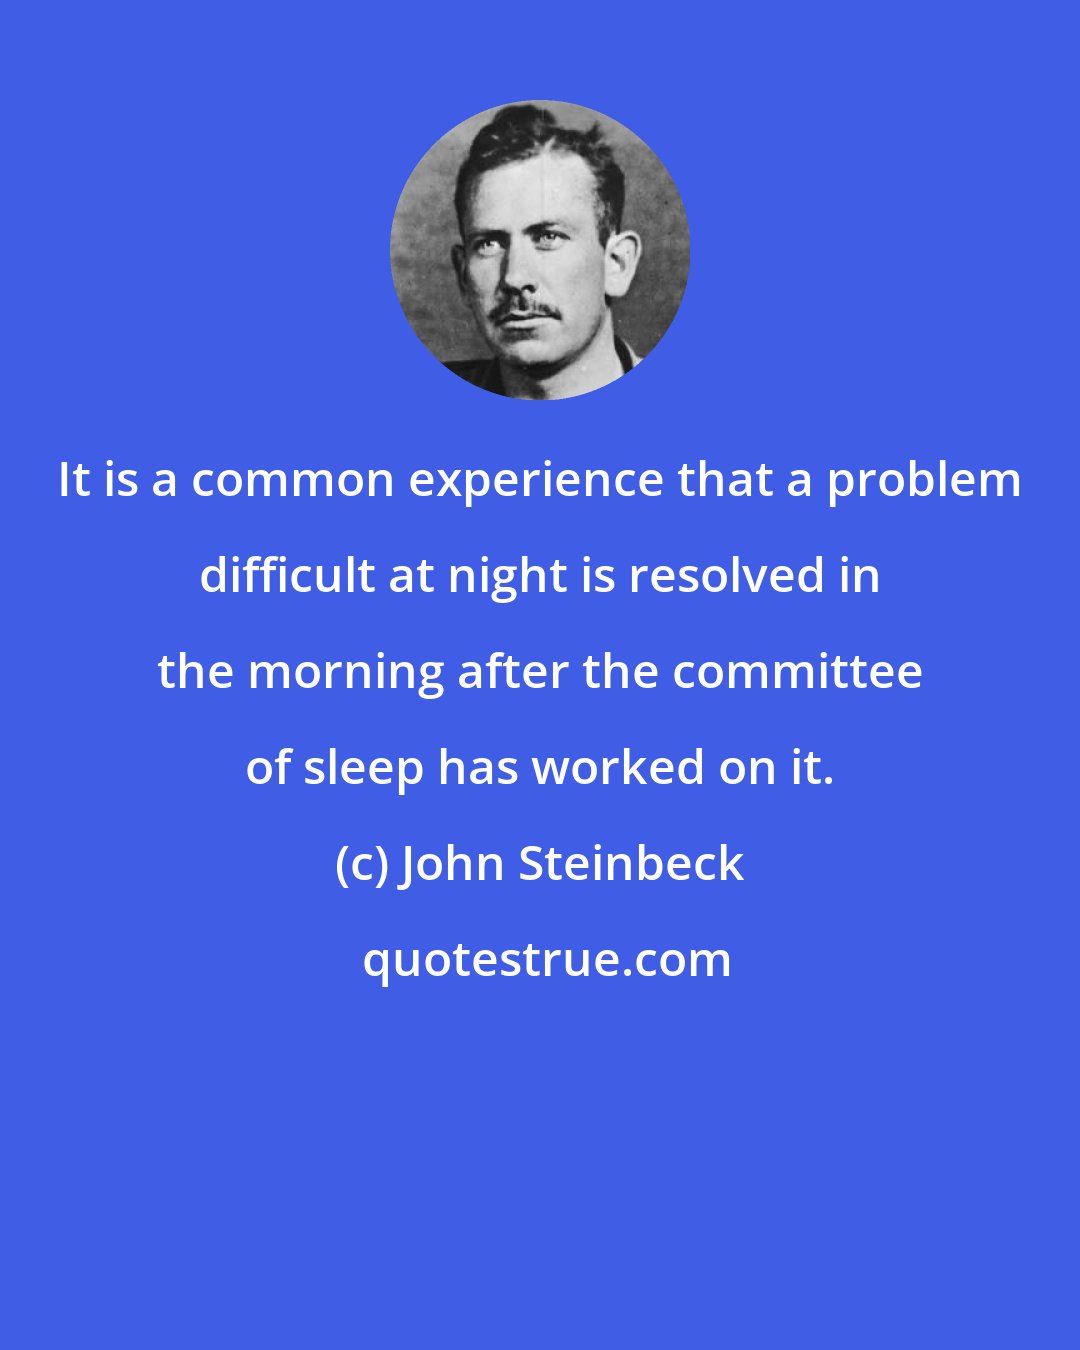 John Steinbeck: It is a common experience that a problem difficult at night is resolved in the morning after the committee of sleep has worked on it.